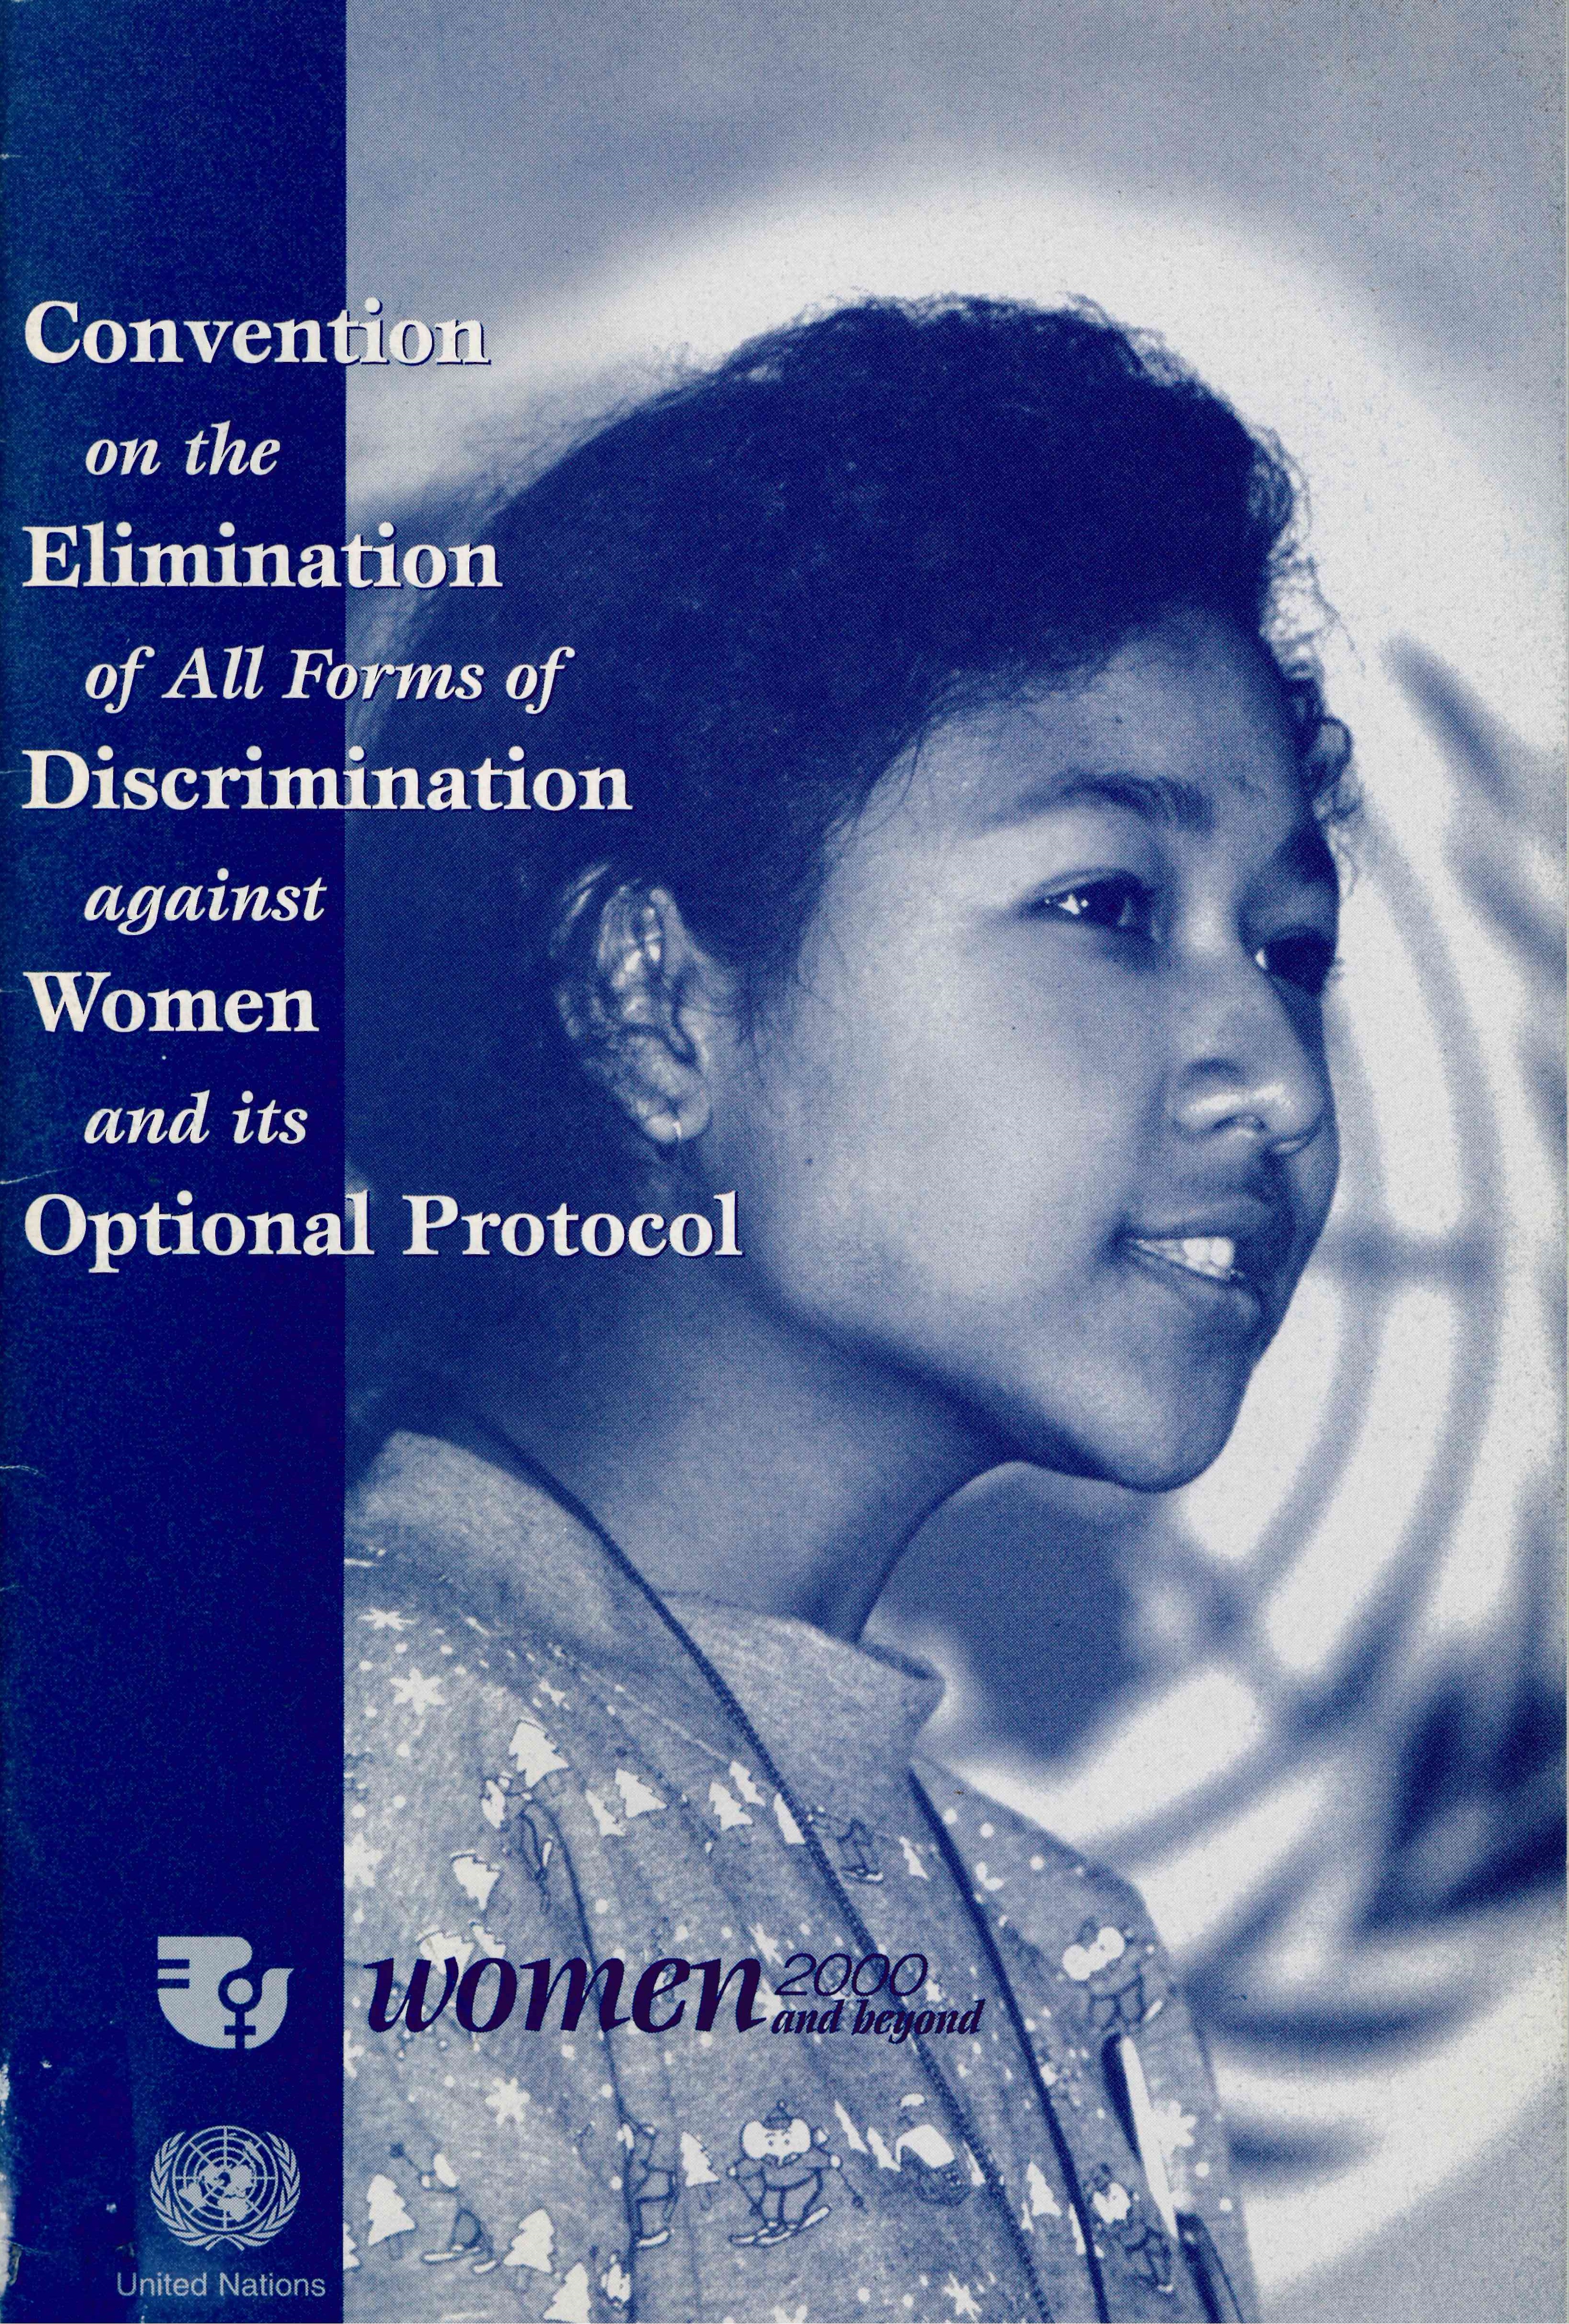 Convention on the Elimination of All Forms of Discrimination against Women and its Optional Protocol